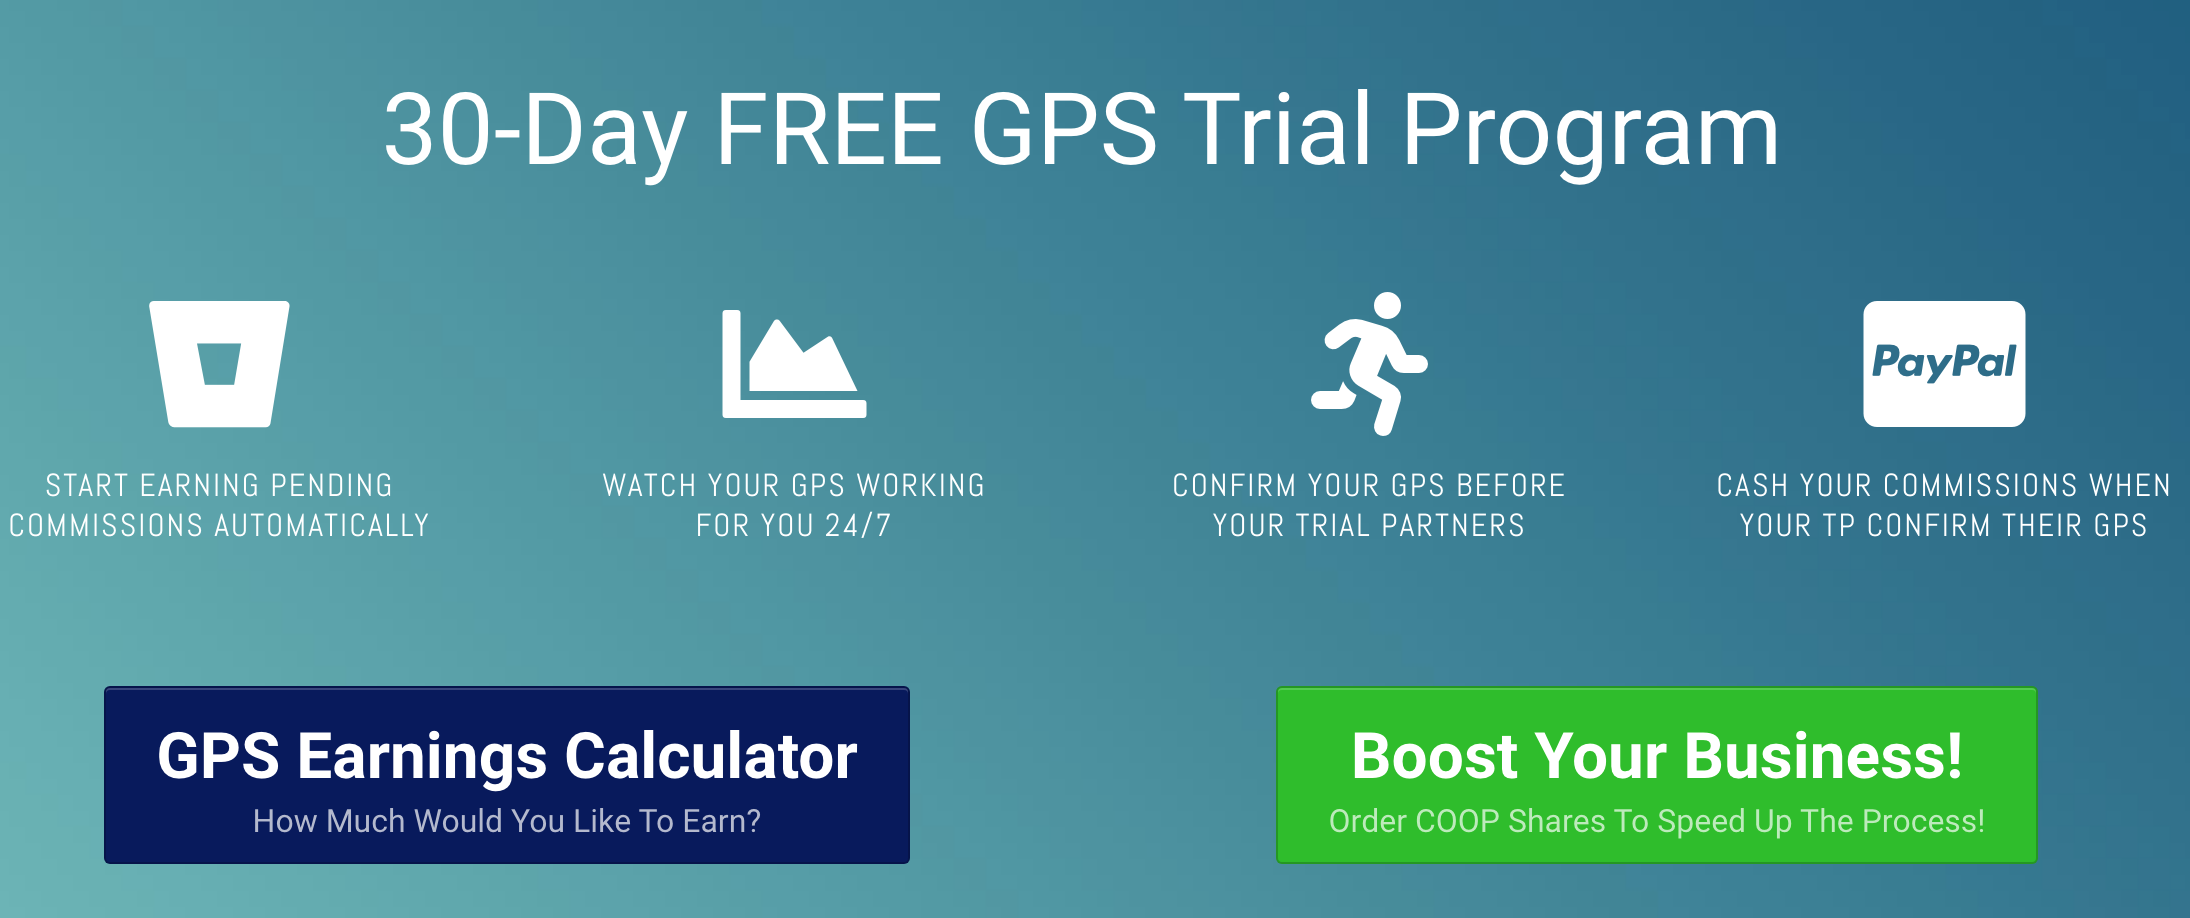 ClubShop Rewards: Start Or Restart The GPS FREE Trial NOW !